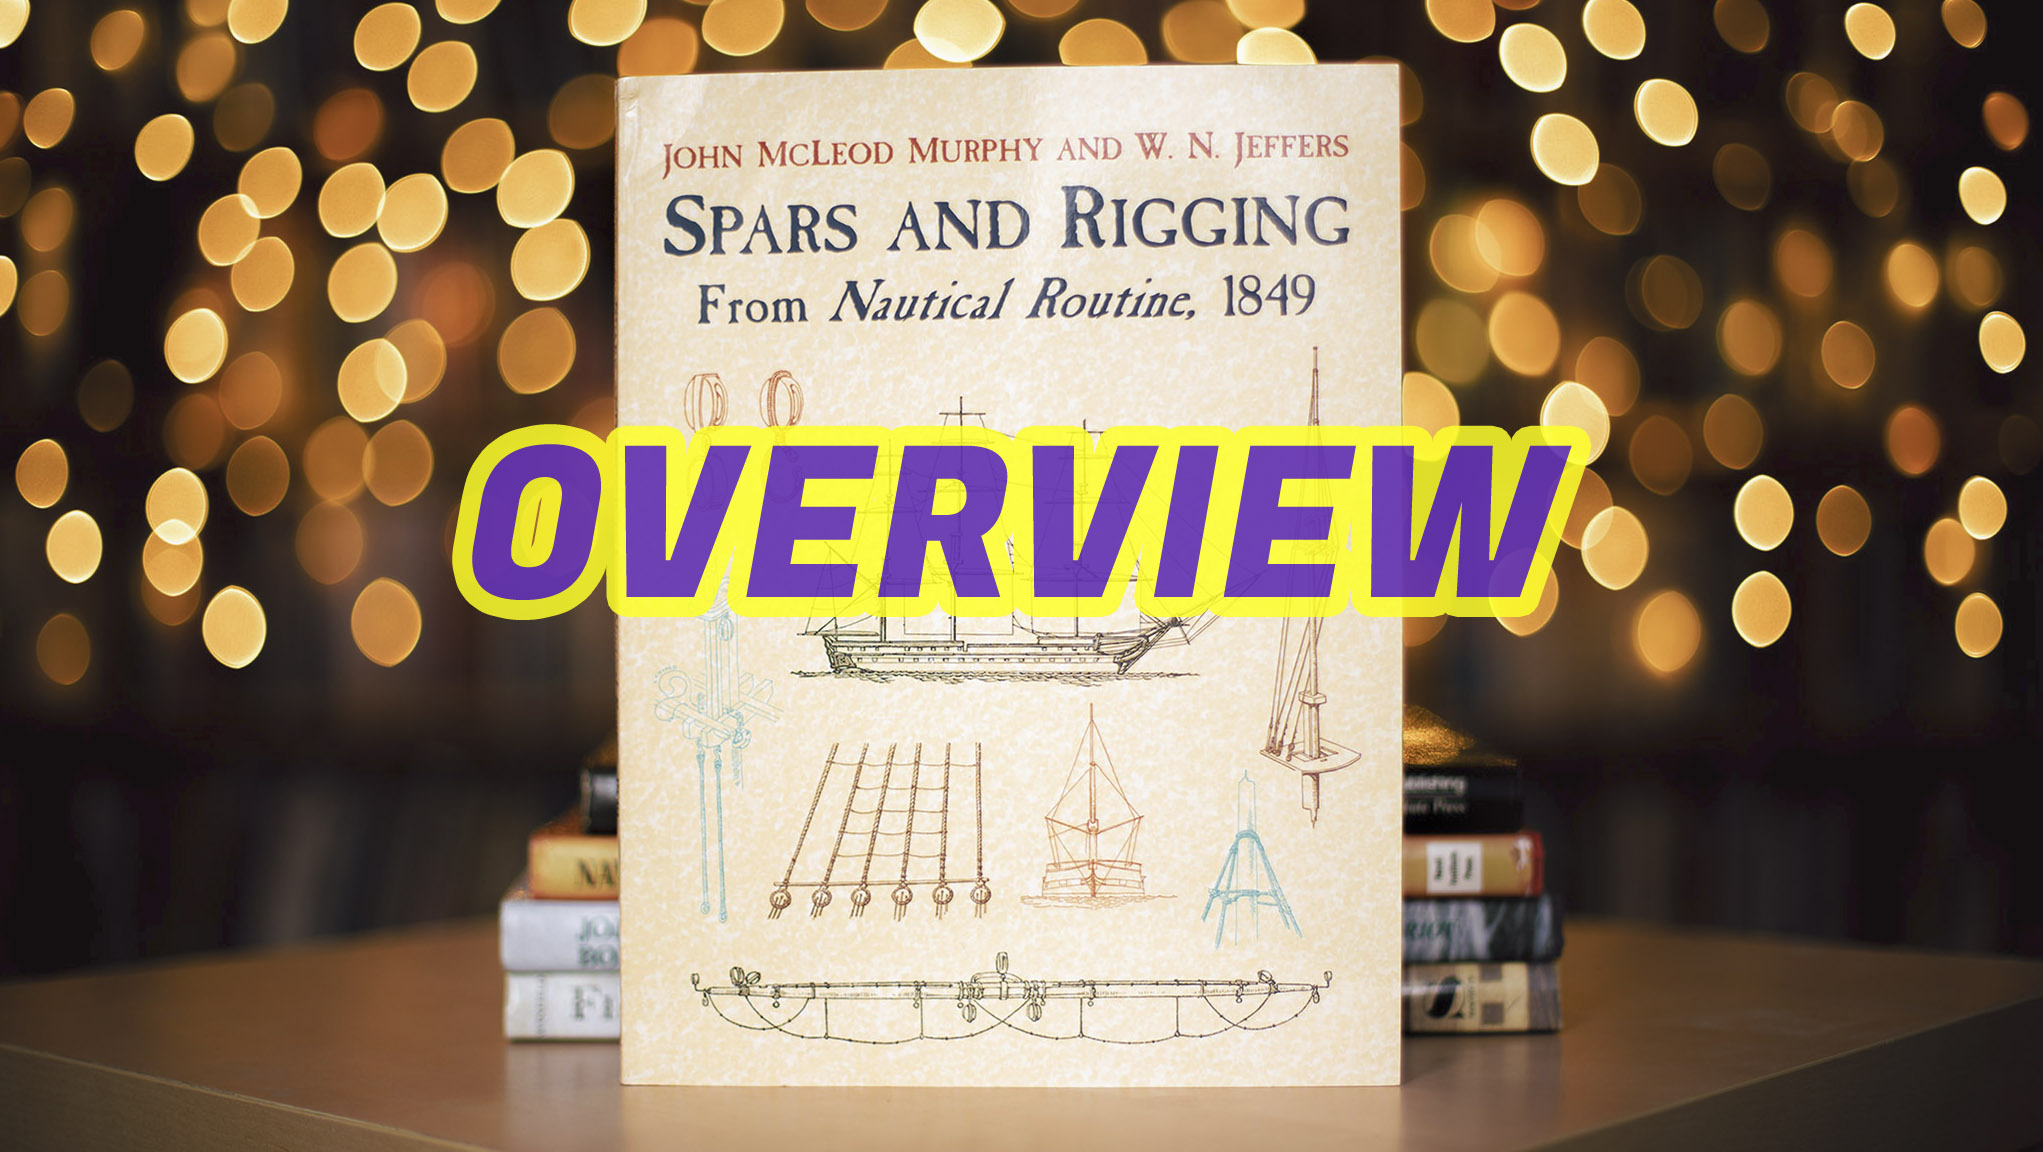 078-OVERVIEW-SPARS and RIGGING  copy.jpg